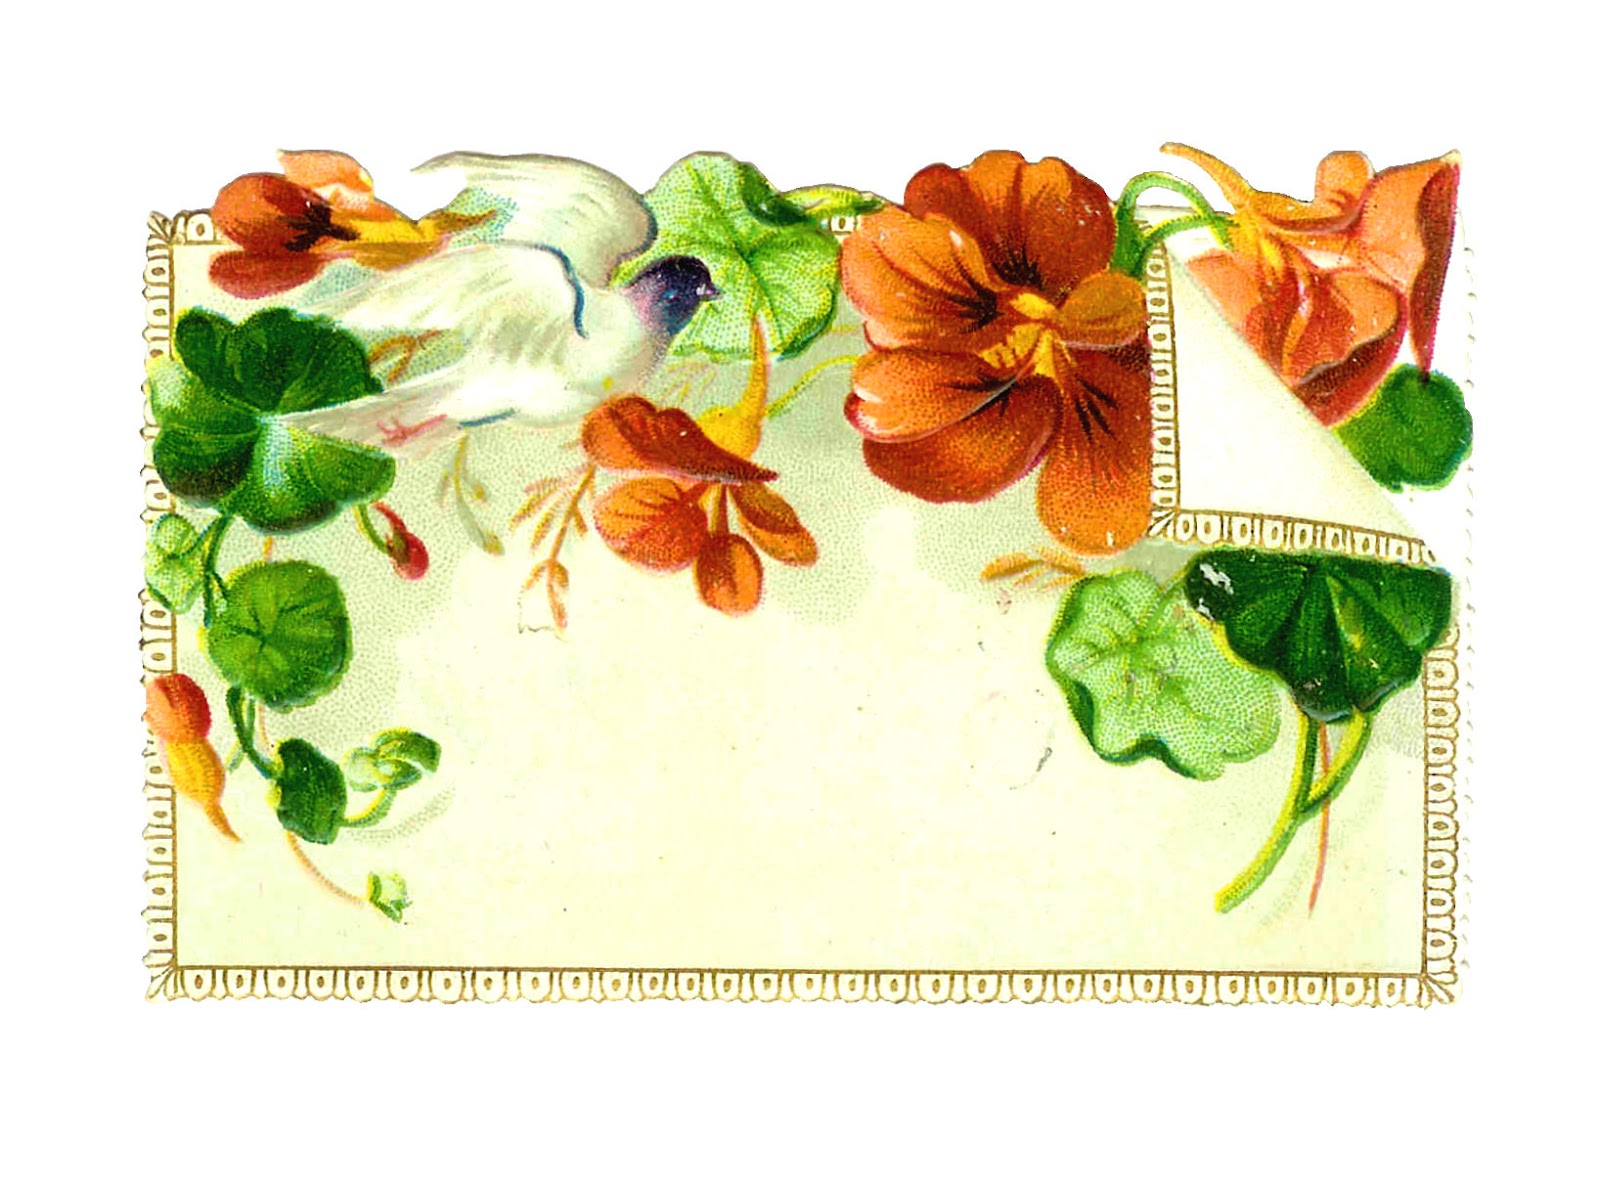 This Is One Of My Favorite Victorian Die Cuts From My 1879 Victorian